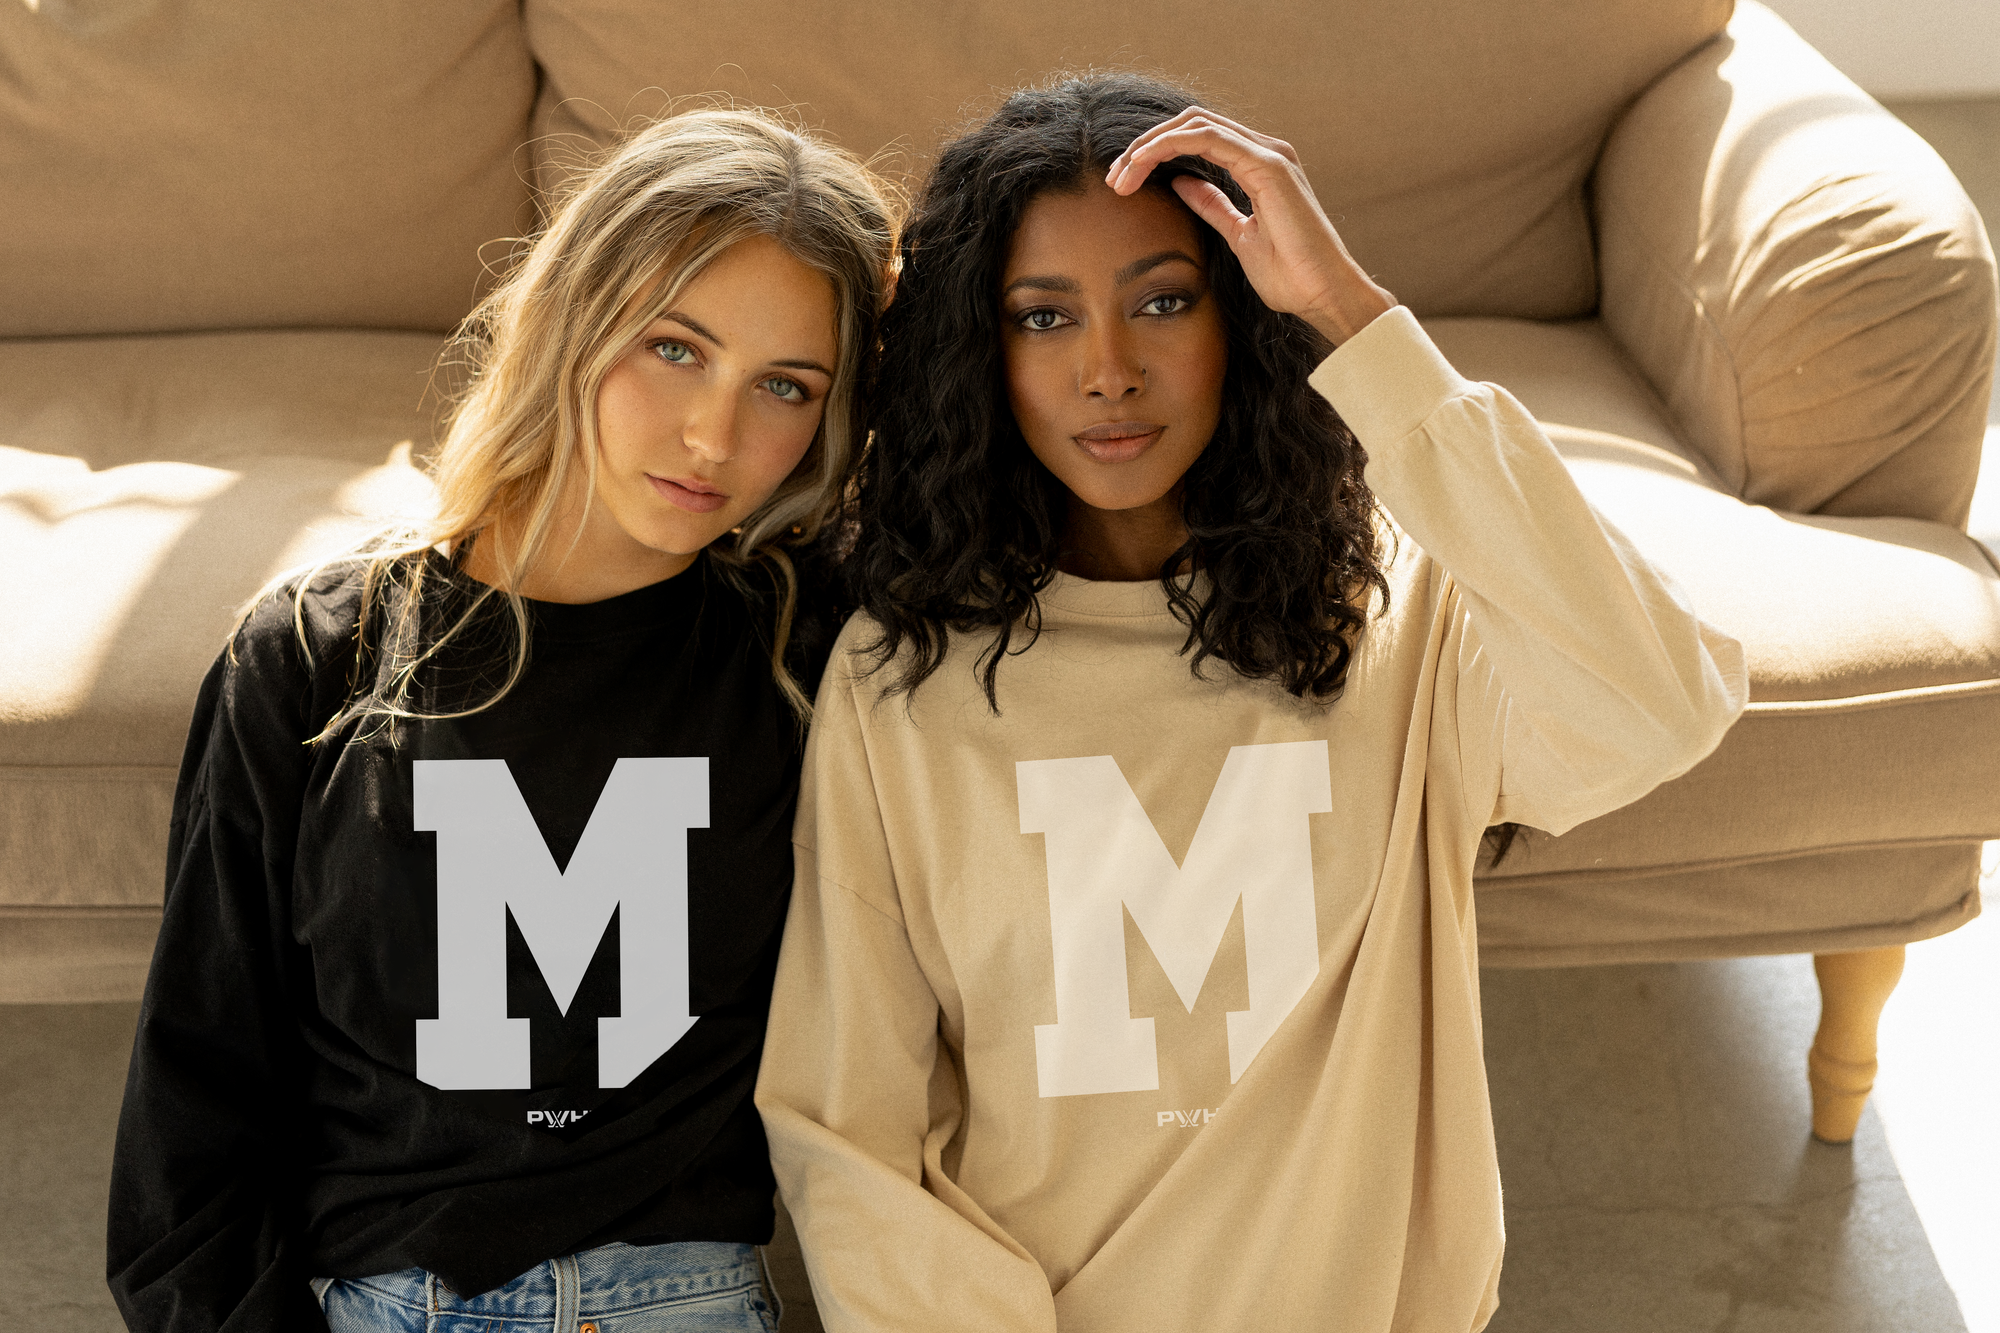 Photo of two women sitting on the floor next to a beige couch, each wearing a long-sleeve t-shirt with a large white M logo.